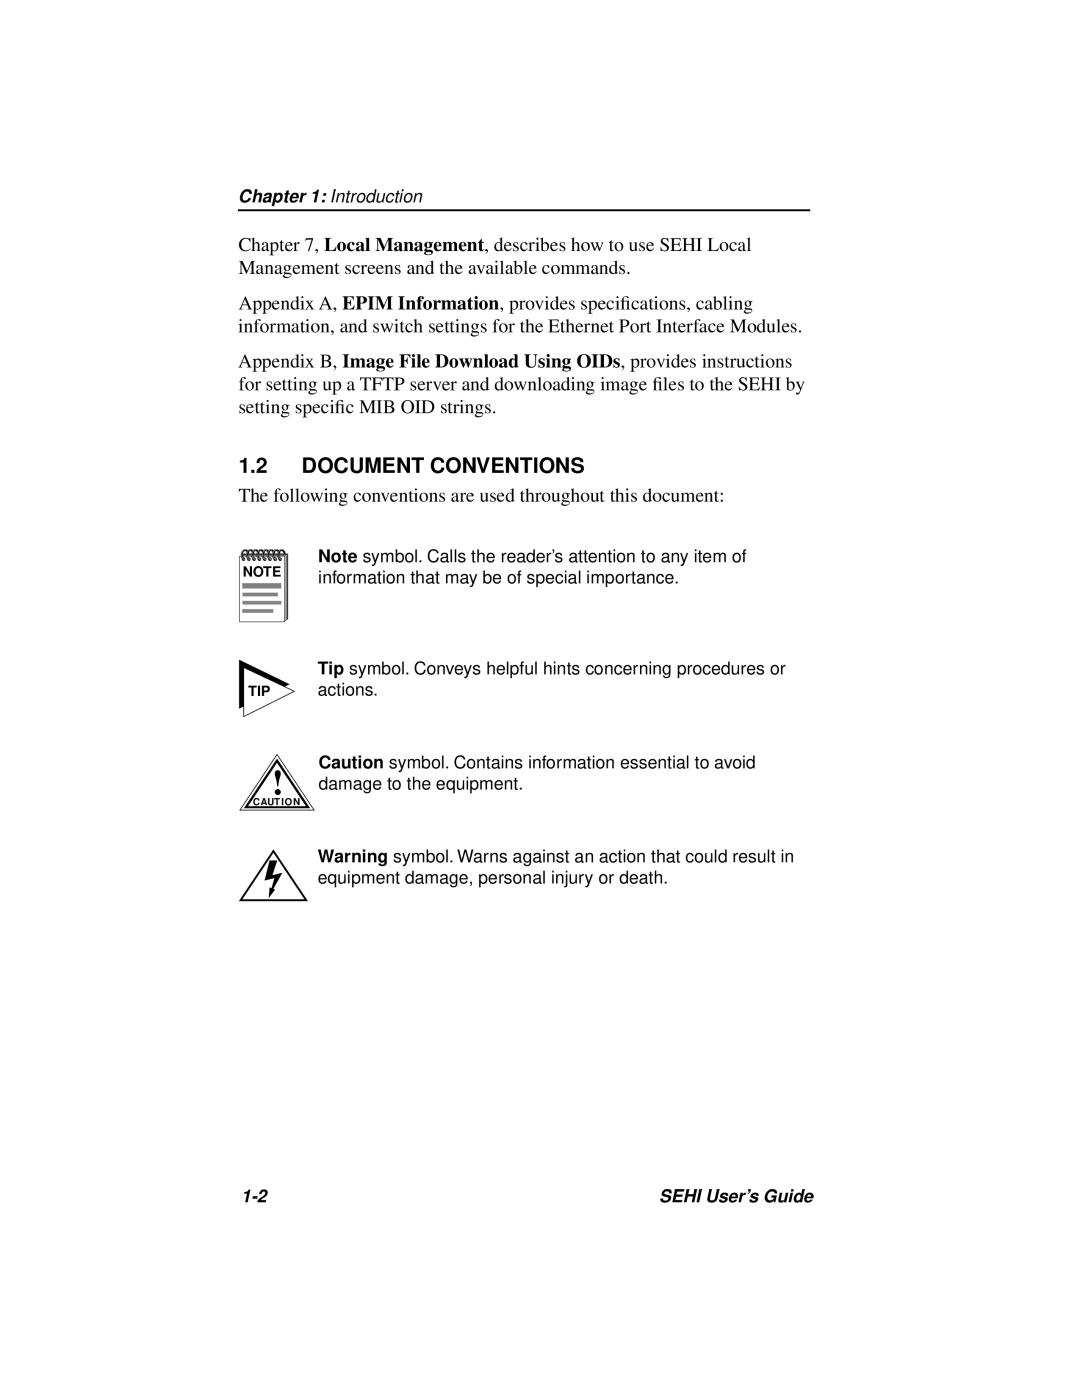 Cabletron Systems SEHI-22FL manual Document Conventions 